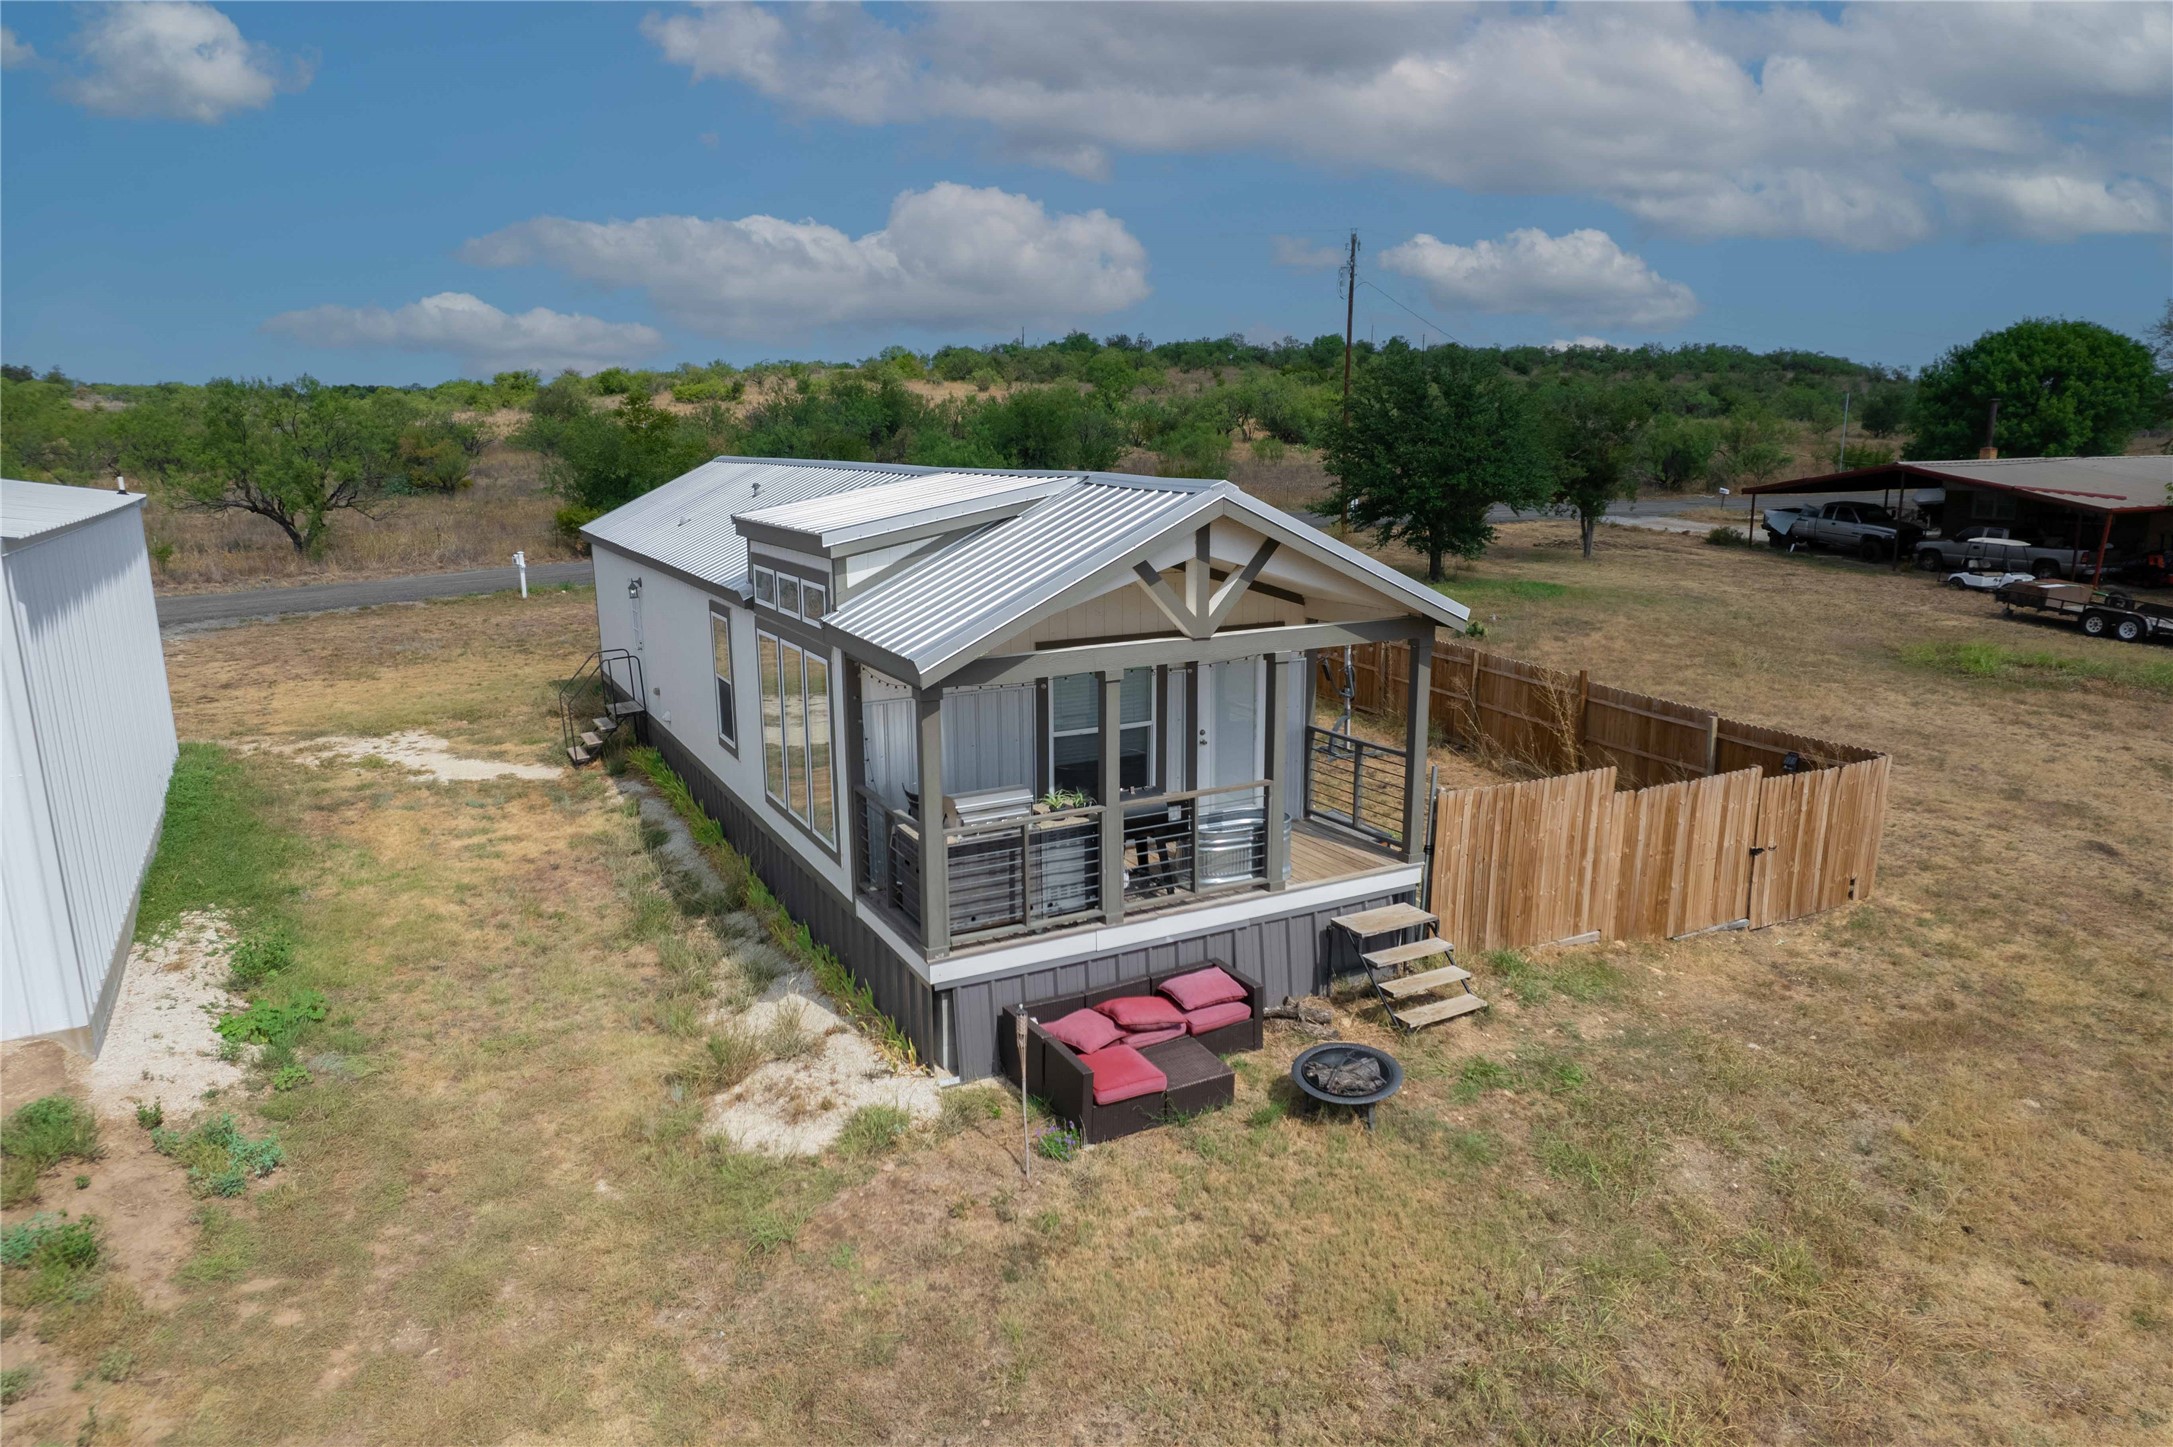 352 Lakeview   Coleman TX 76834